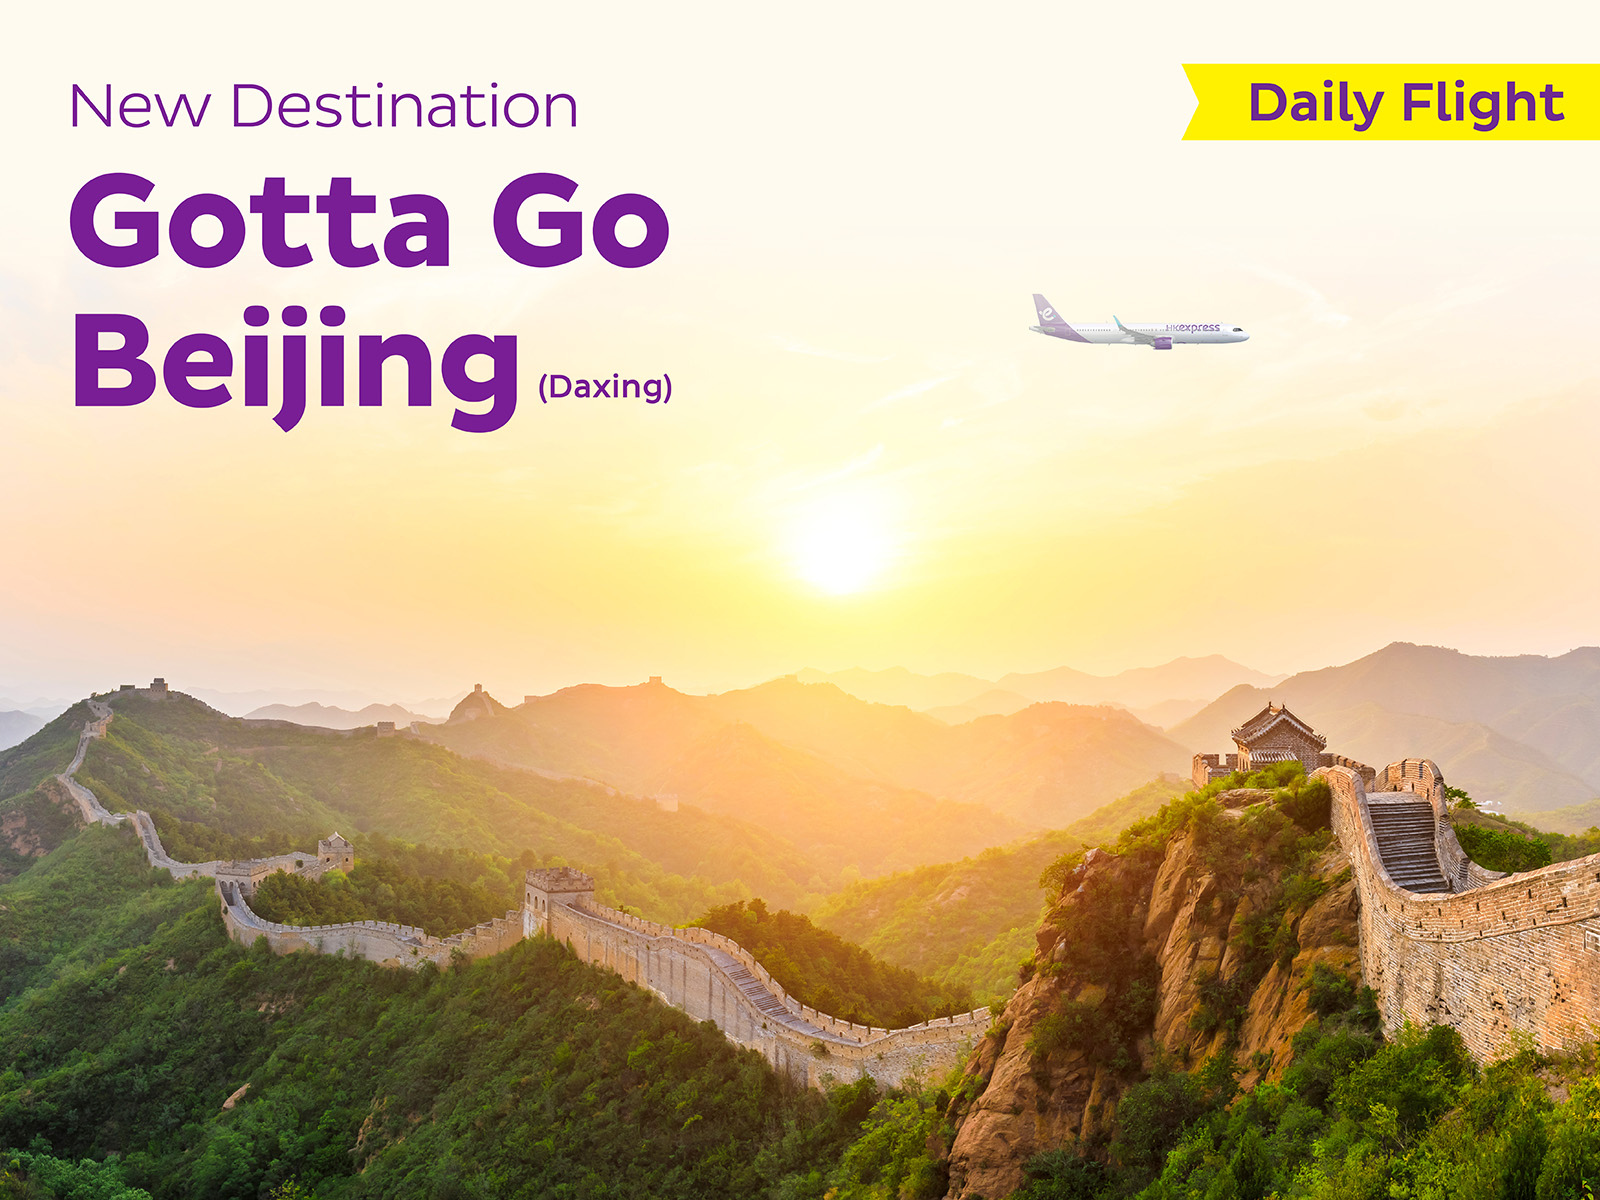 HK Express Debuts Daily Flights to Beijing Daxing International Airport Starting 12 March